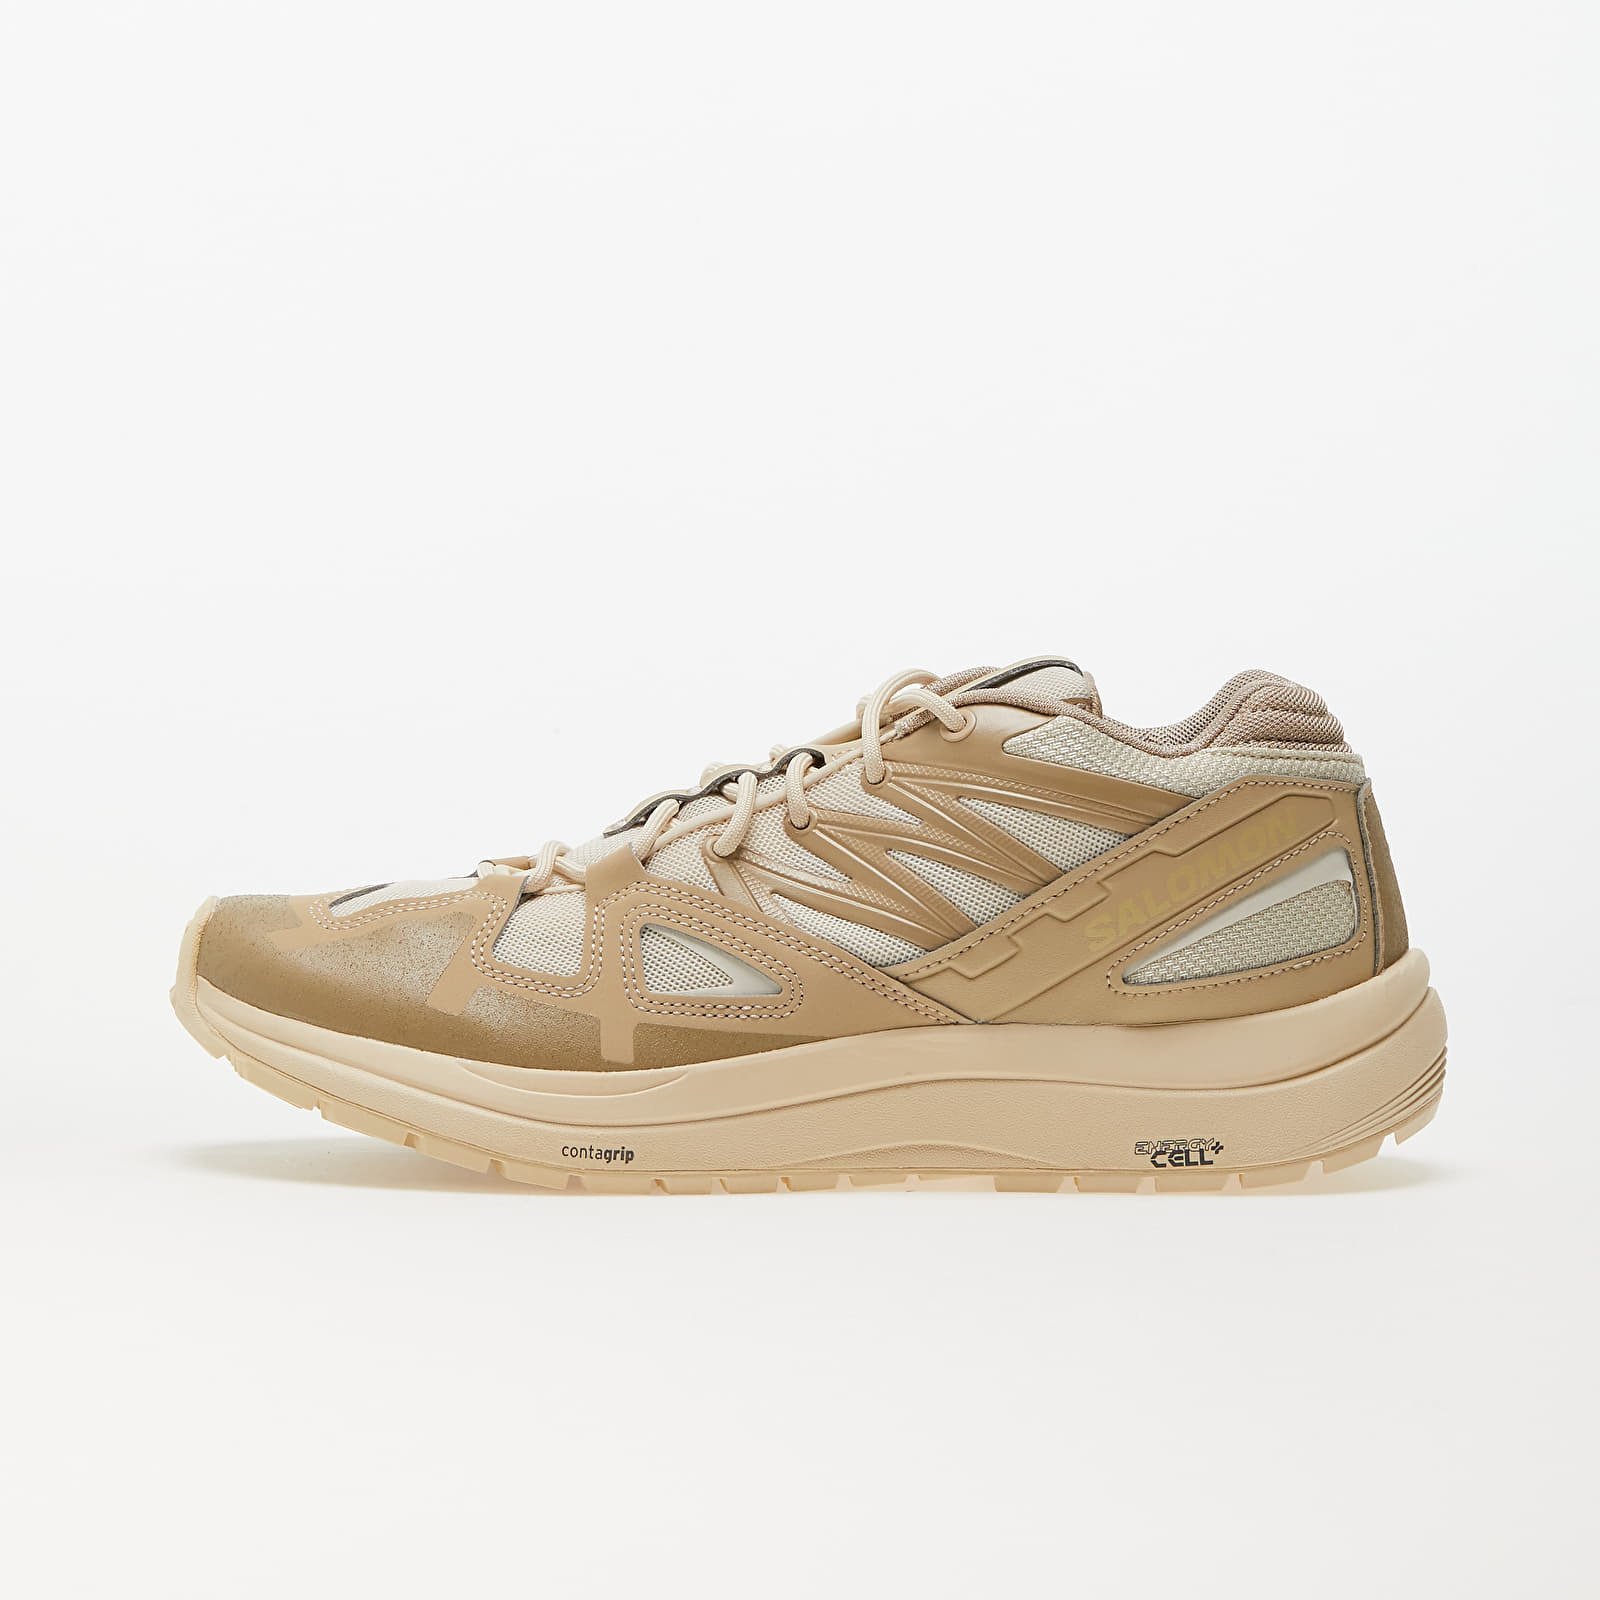 Odyssey 1 "Bleached Sand"